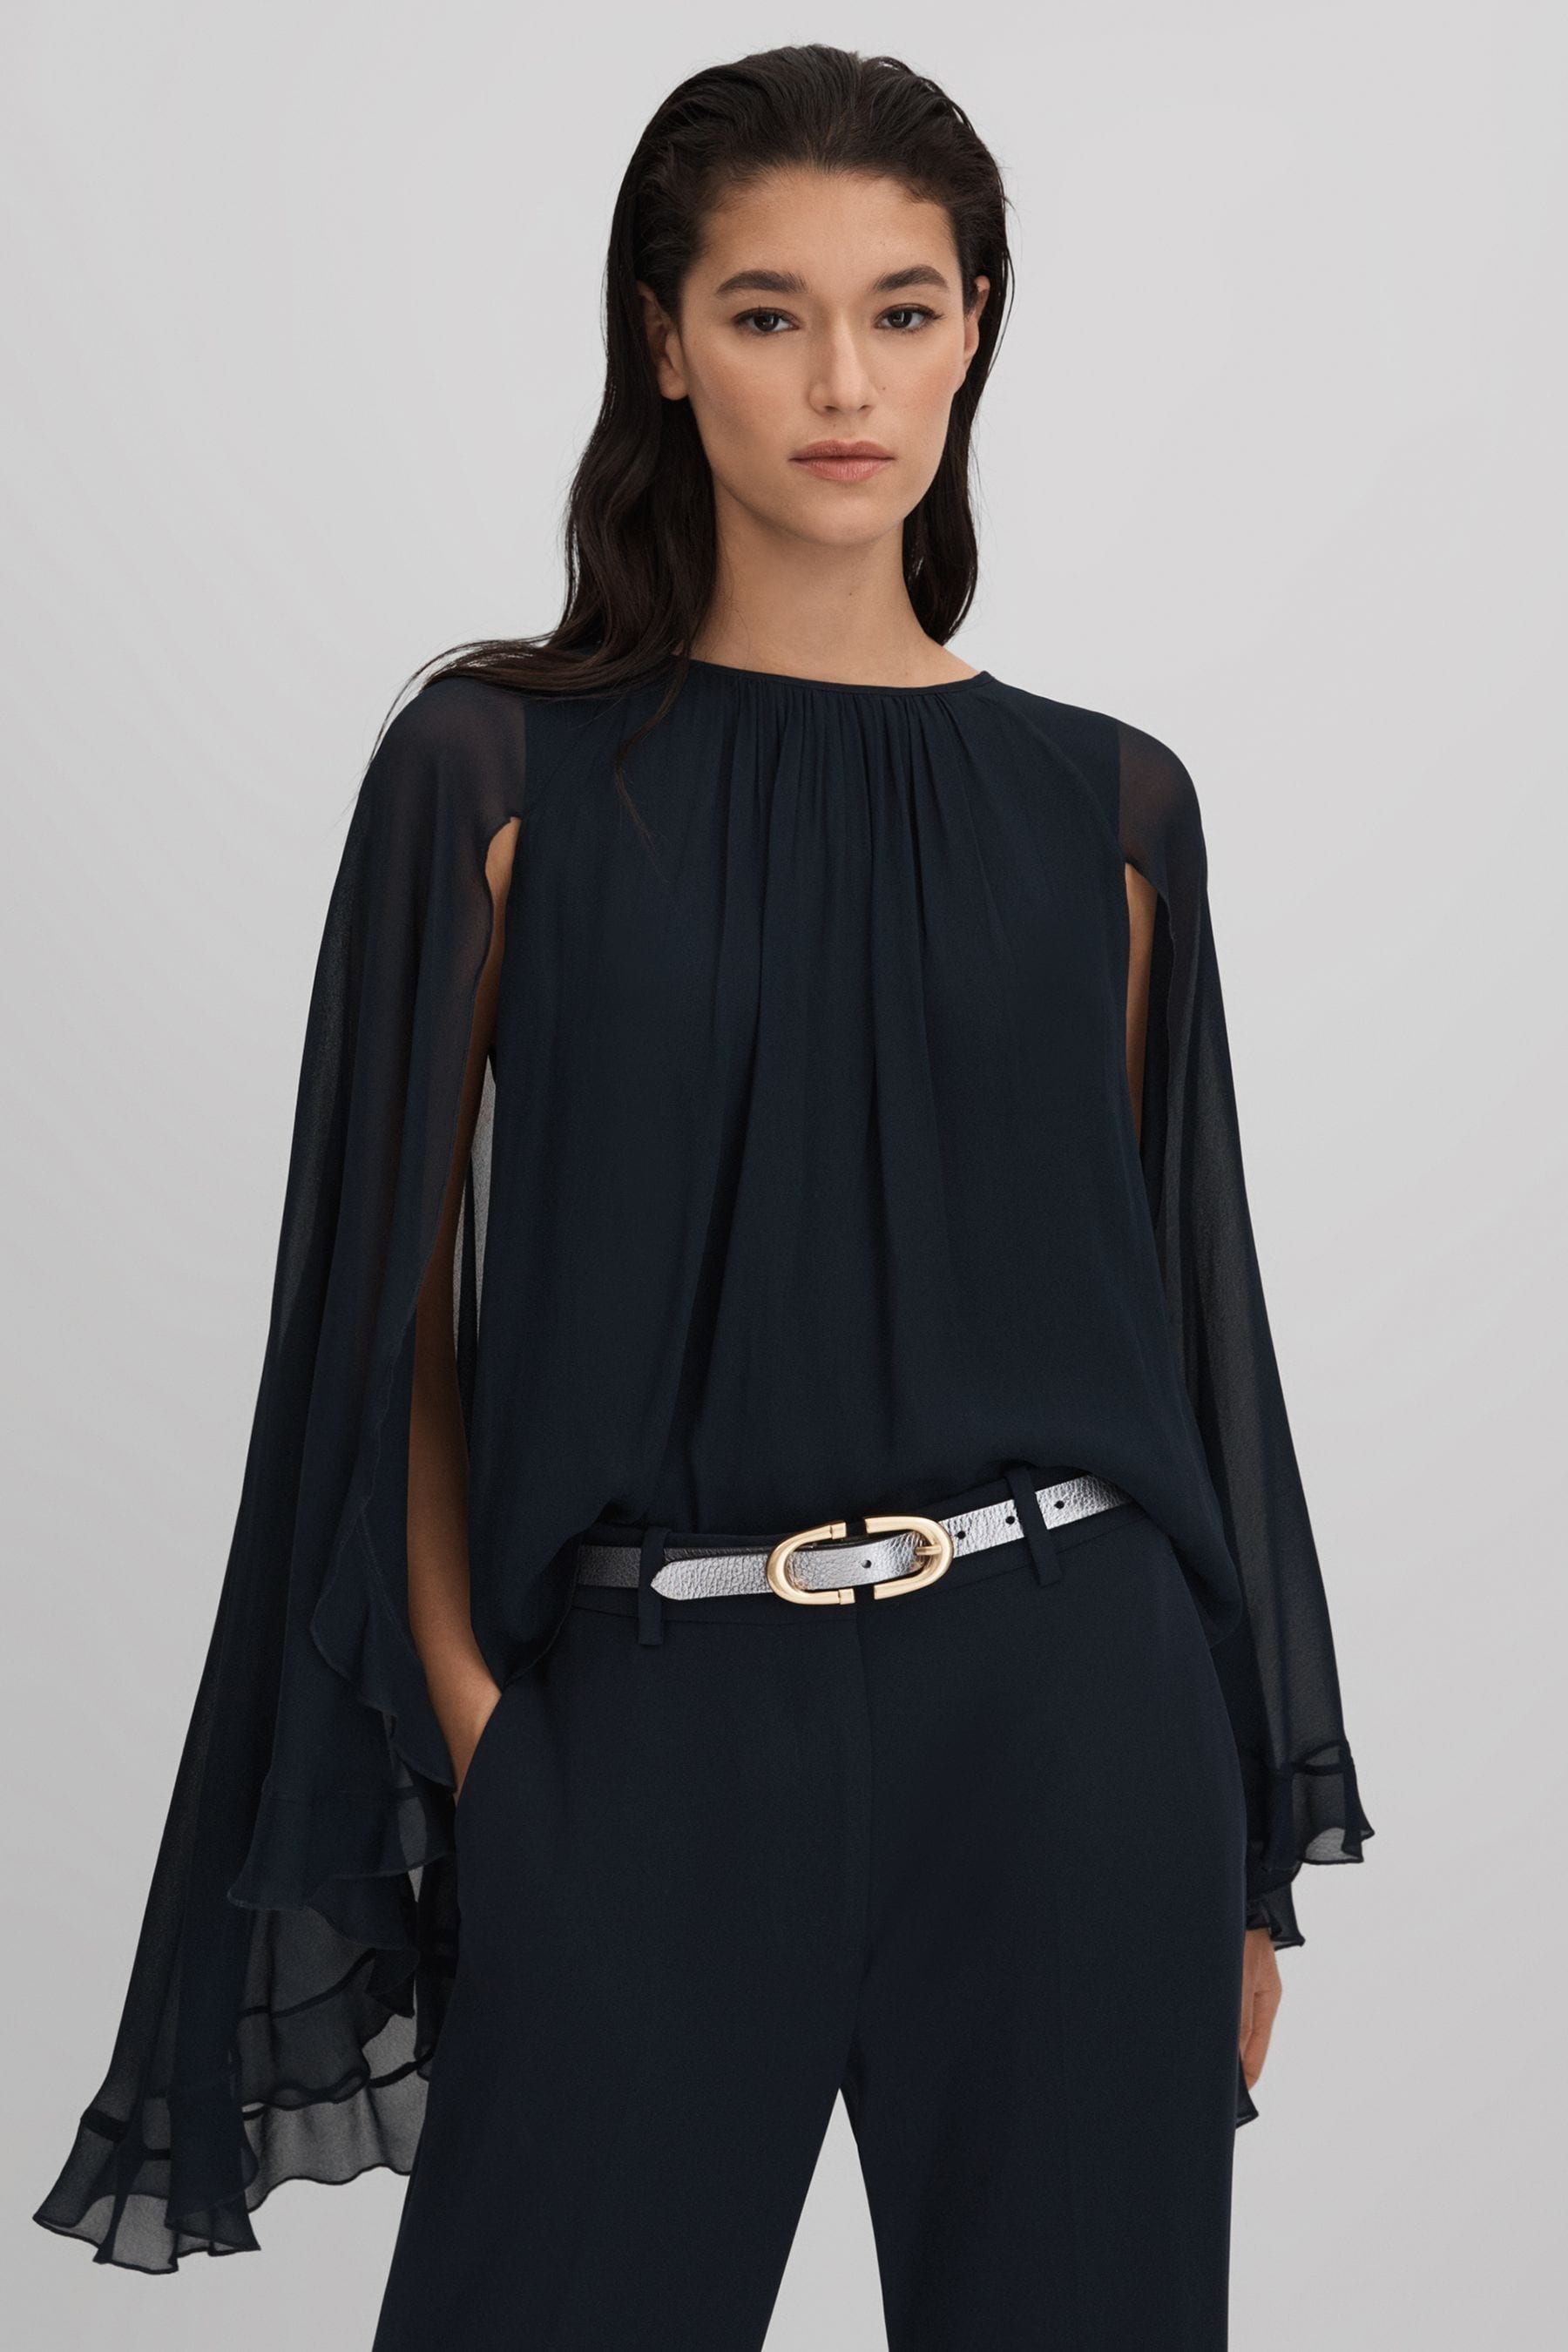 Reiss Francesca - Navy Pleated Cape Style Top, Us 4